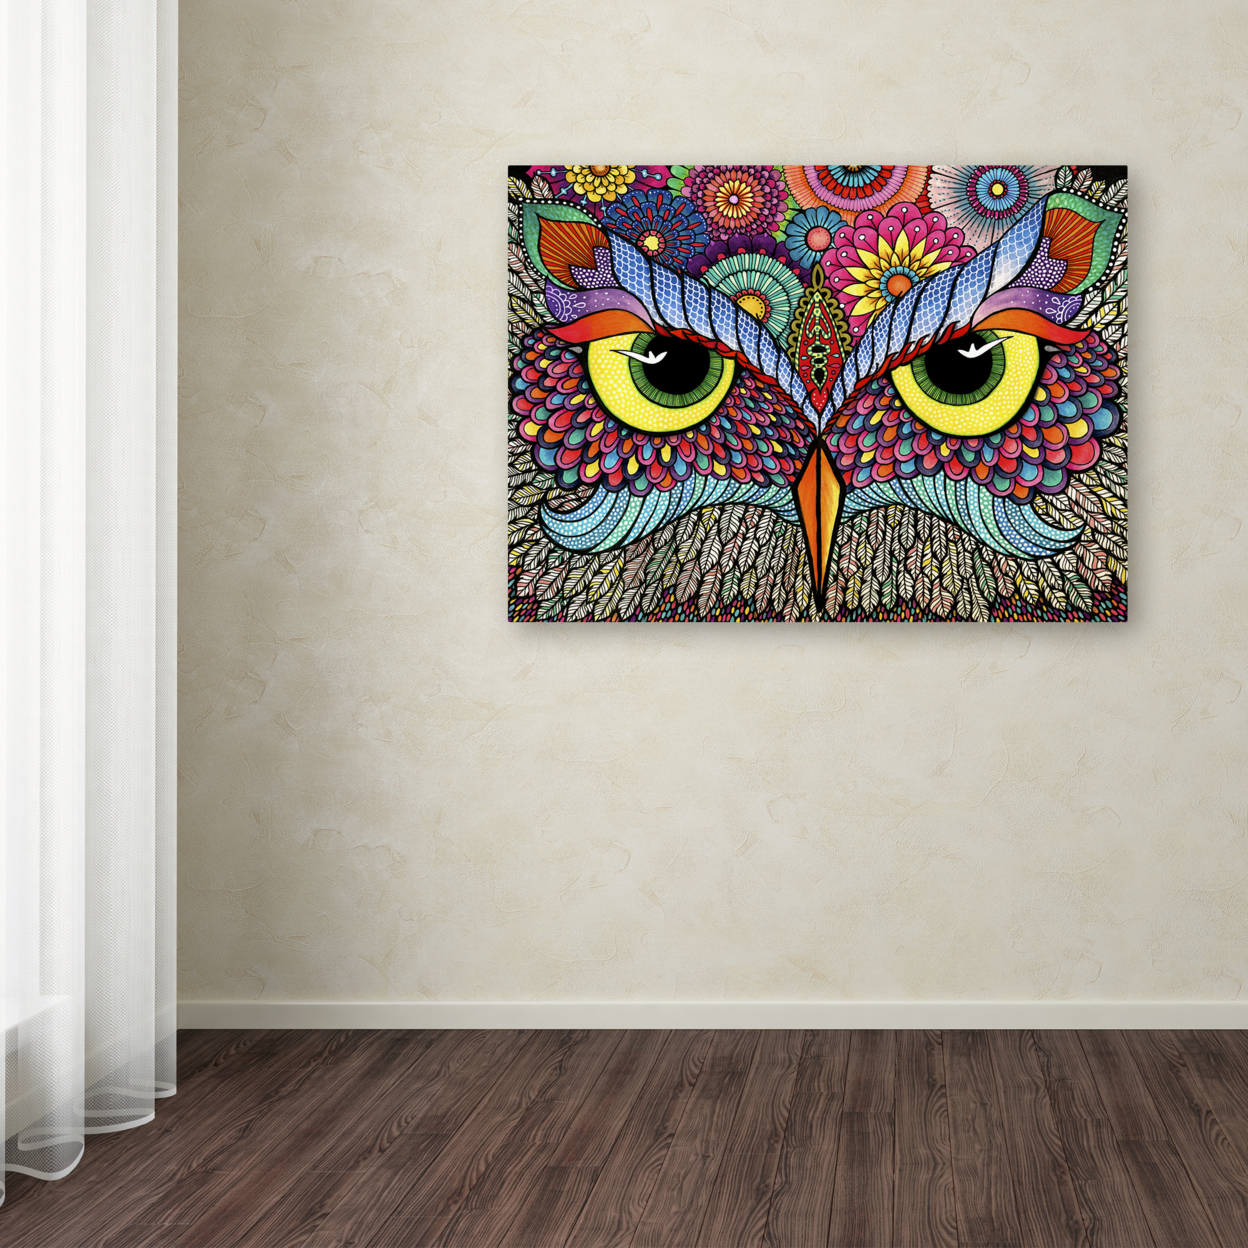 Hello Angel 'Owl Face' Canvas Wall Art 35 X 47 Inches